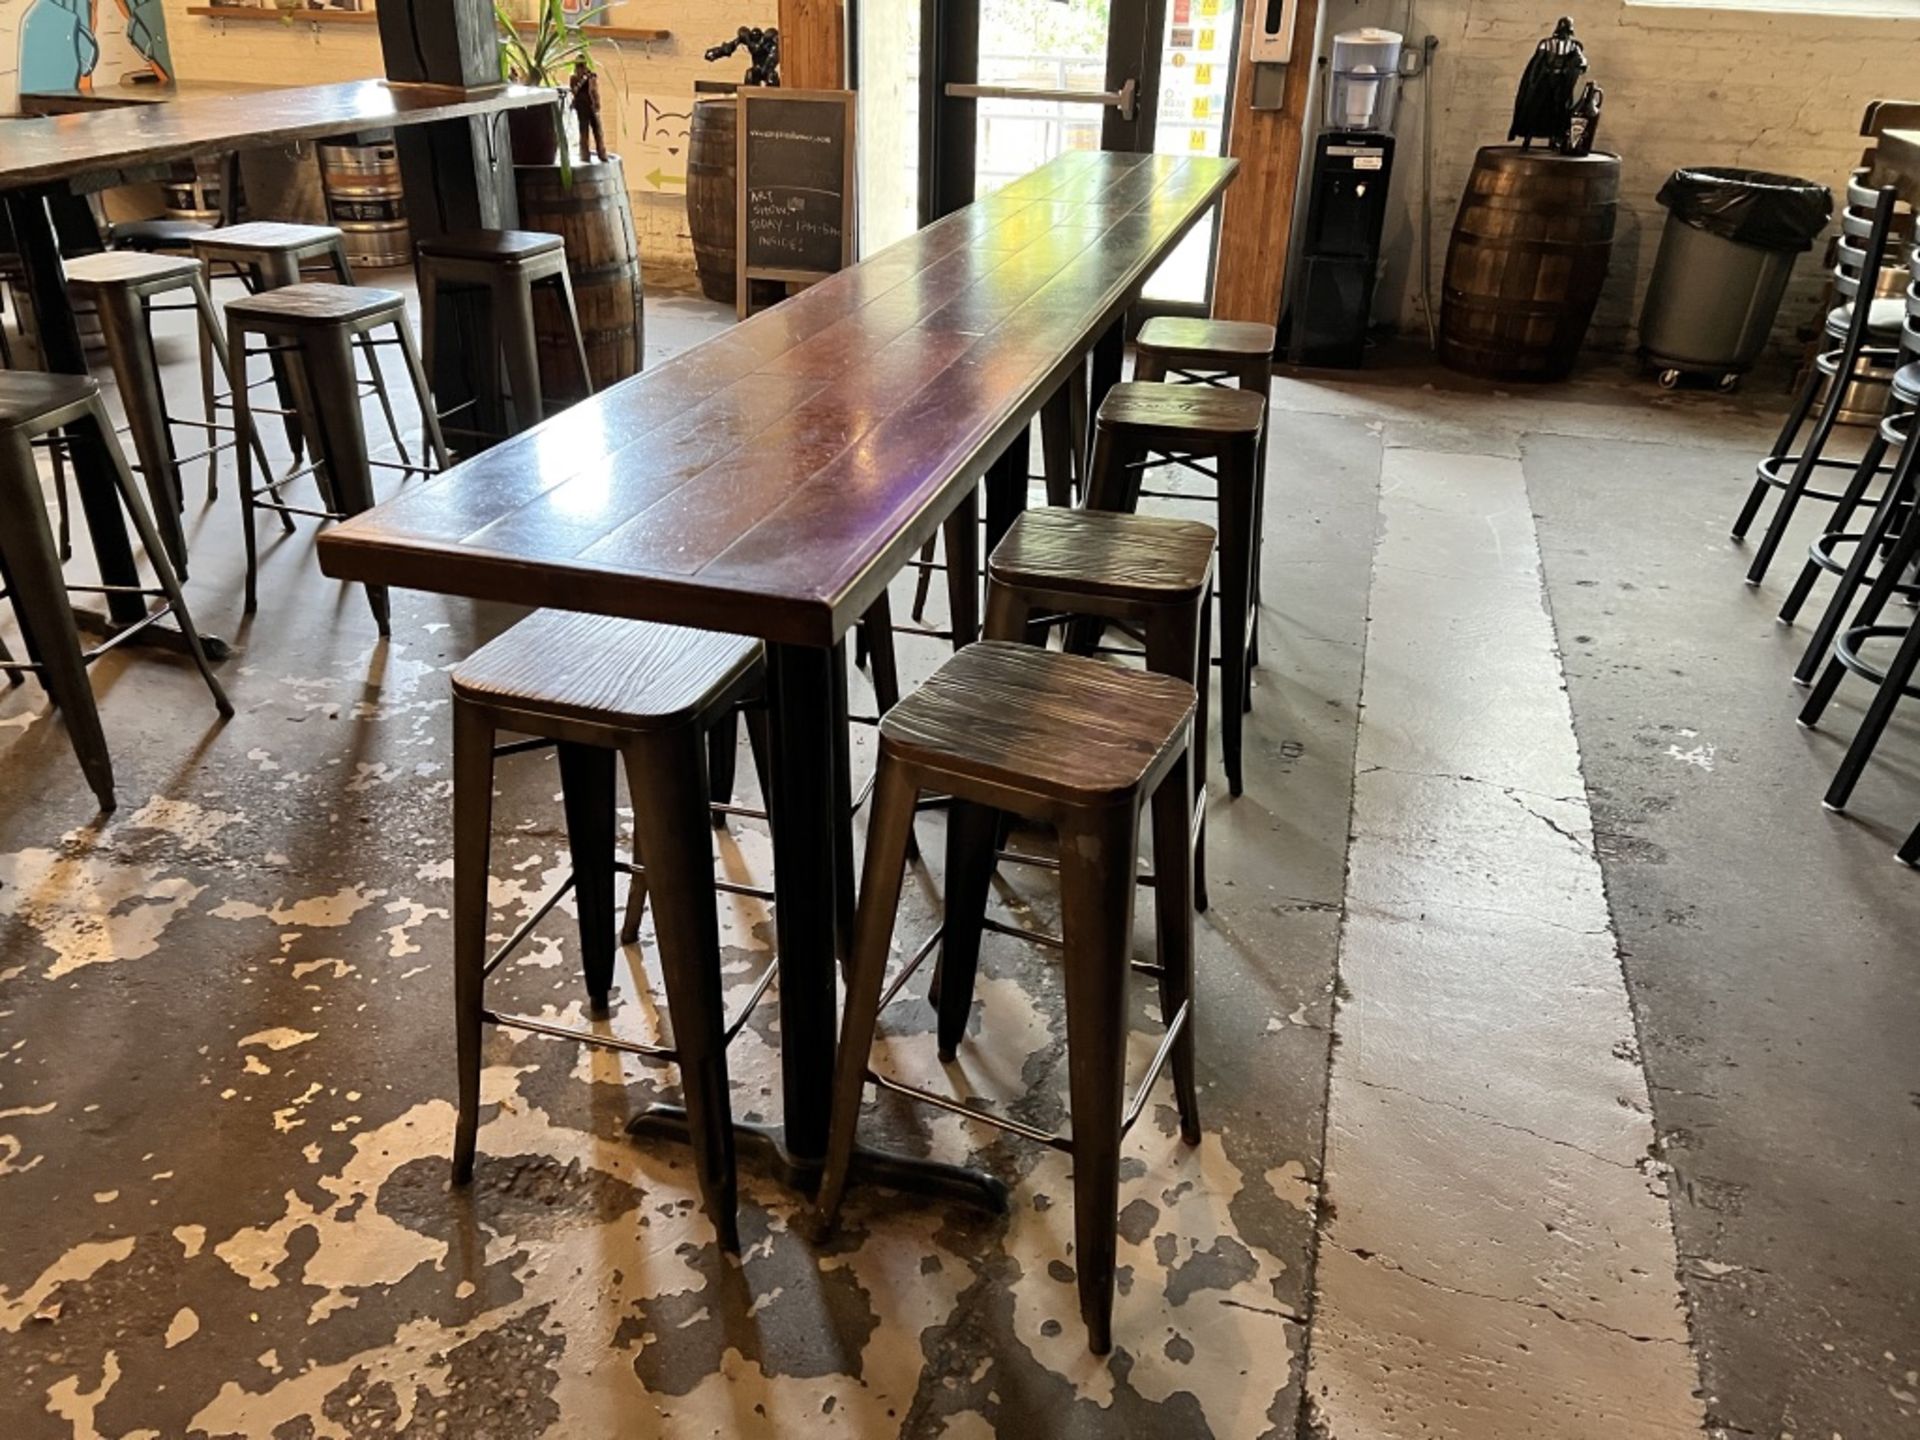 LOT OF: (1) 10' L X 17.5" WIDE WOODEN TABLE AND (8) METAL STOOLS W/ WOOD TOP SEAT - Image 9 of 9